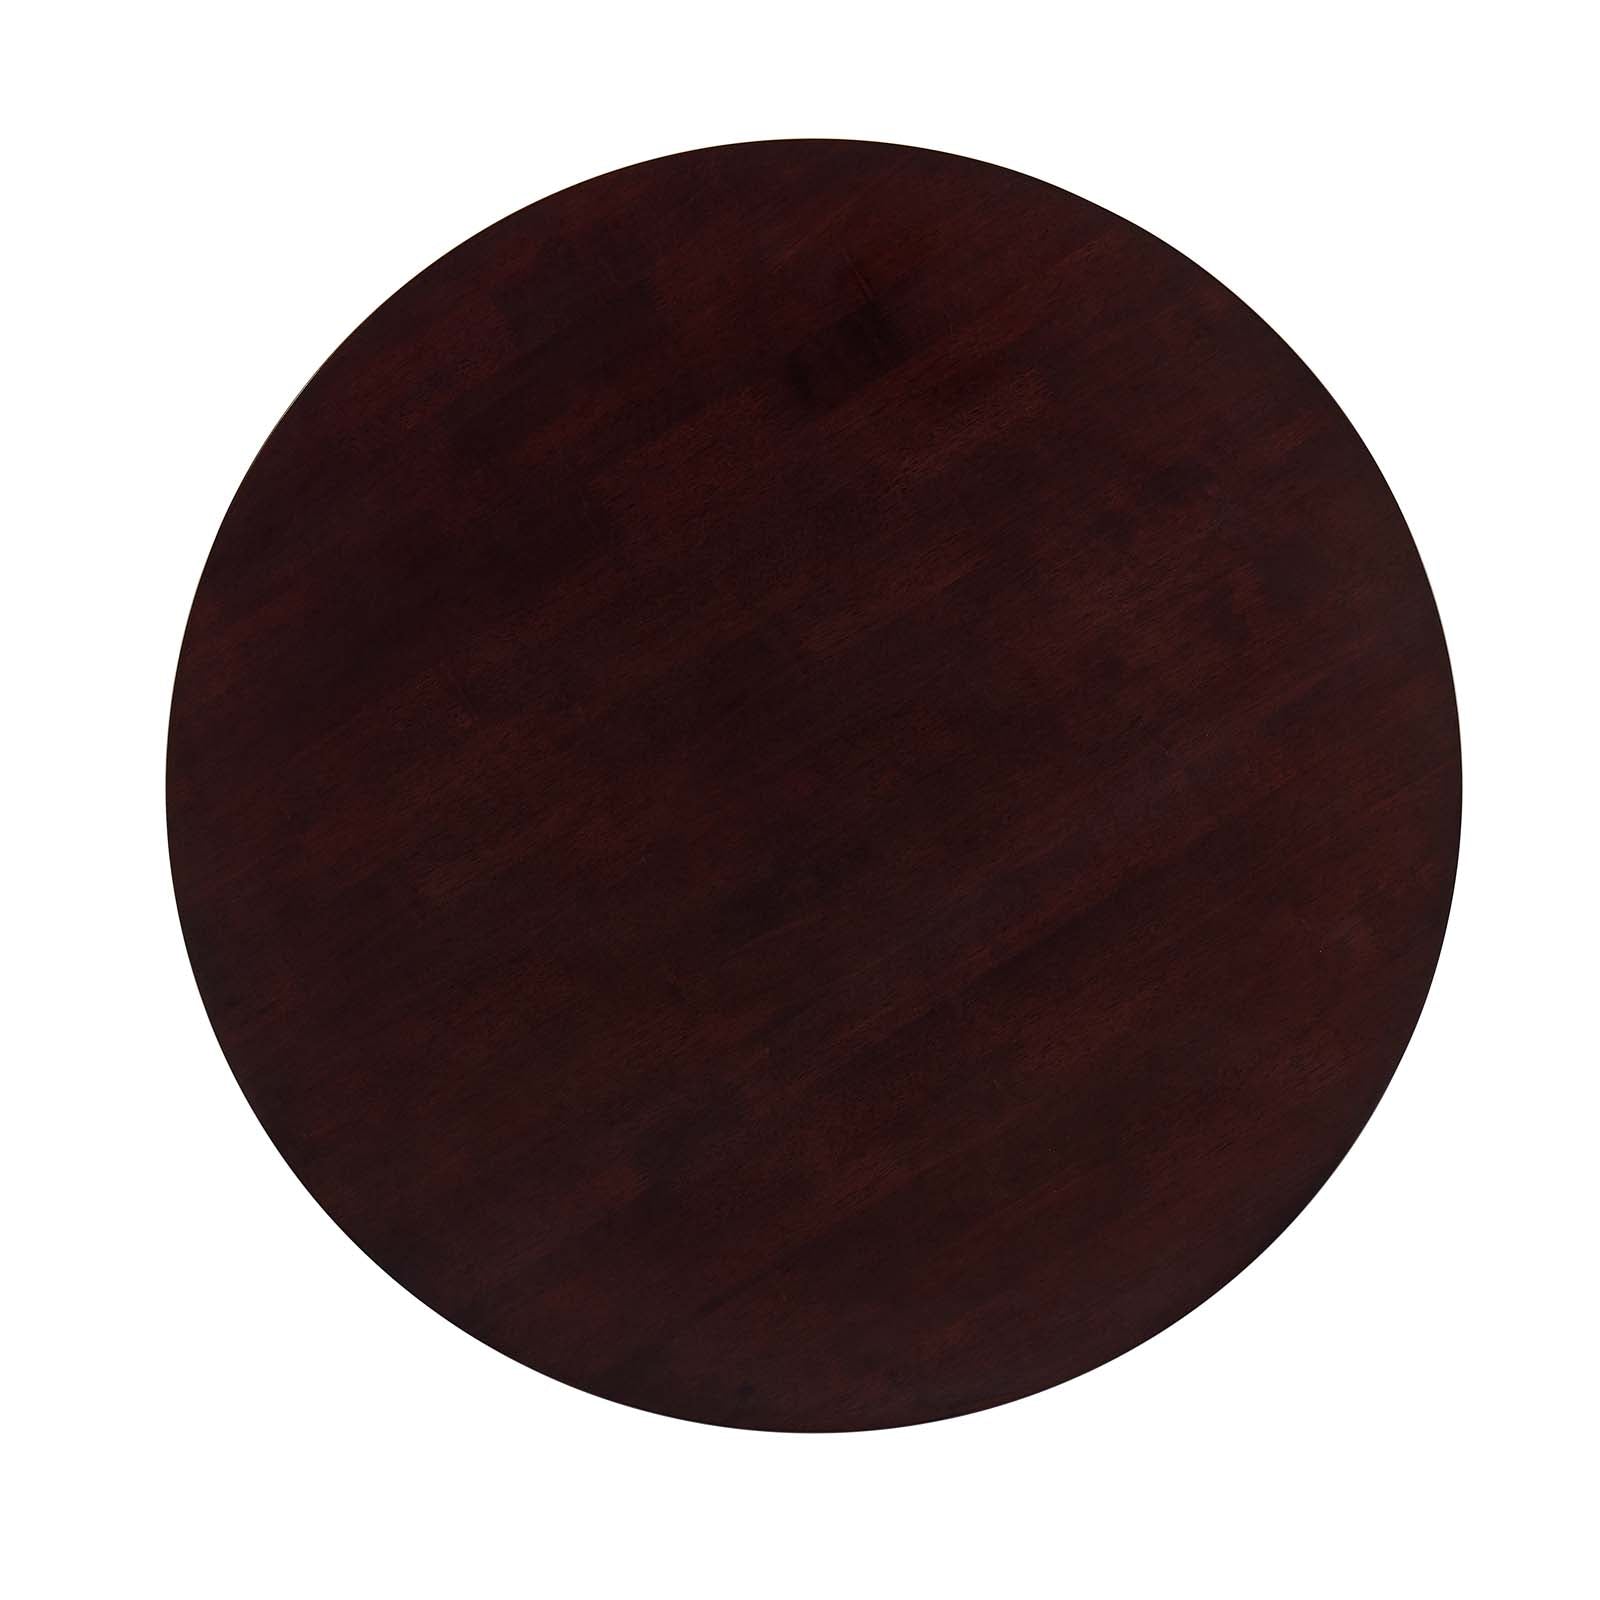 Vision 35" Round Dining Table